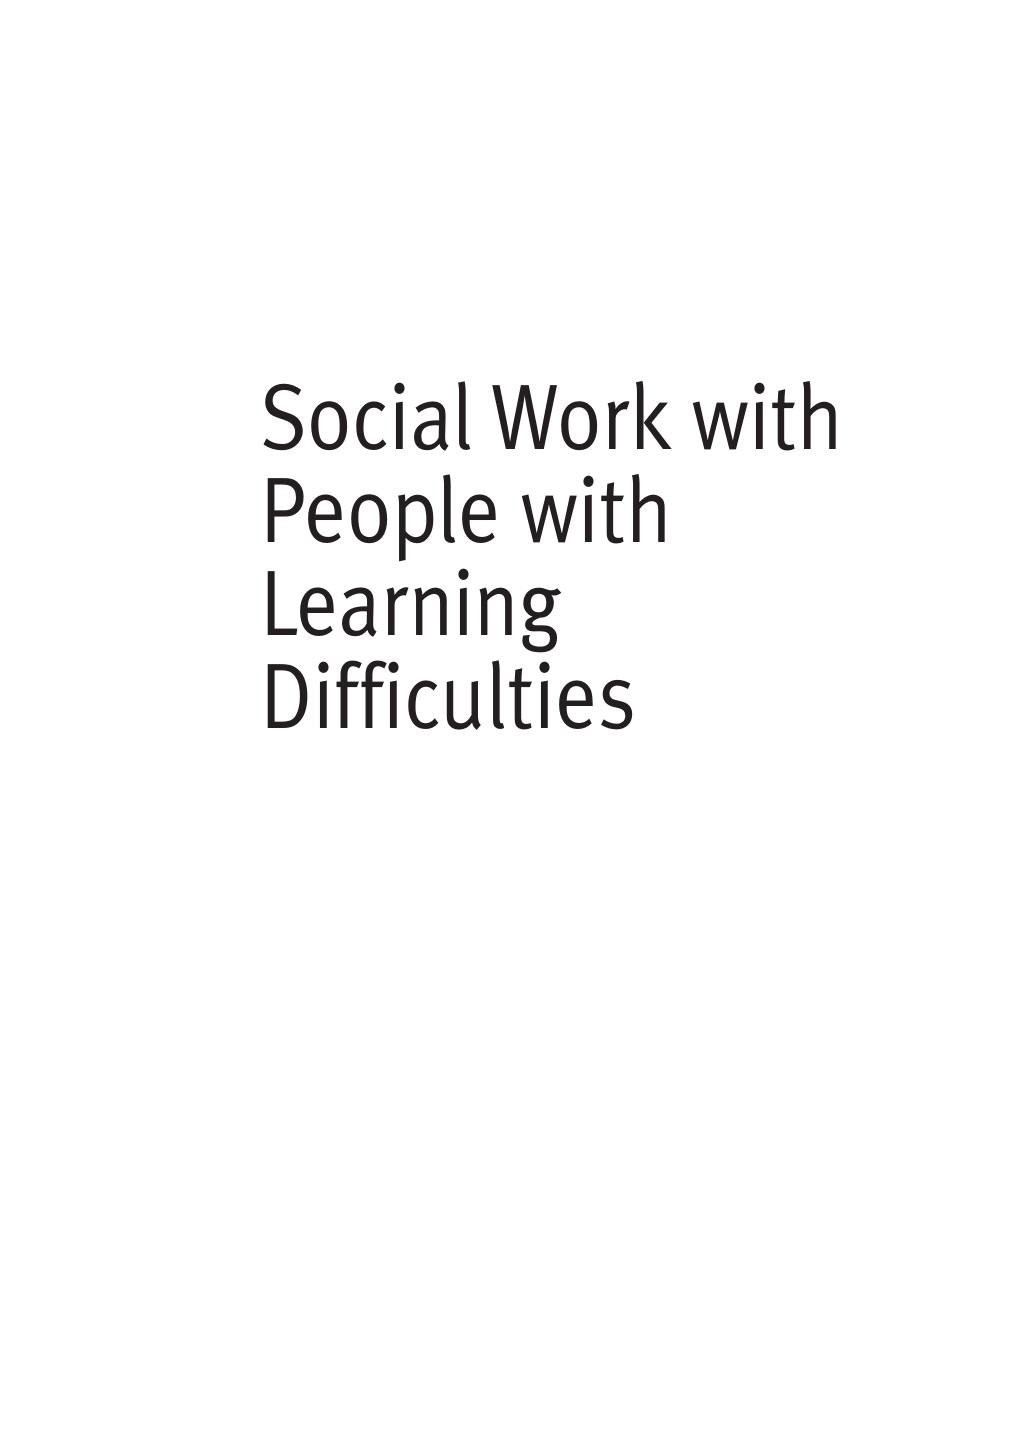 Social Work With People With Learning Difficulties (Transforming Social Work Practice), 2nd Edition ( PDFDrive.com )